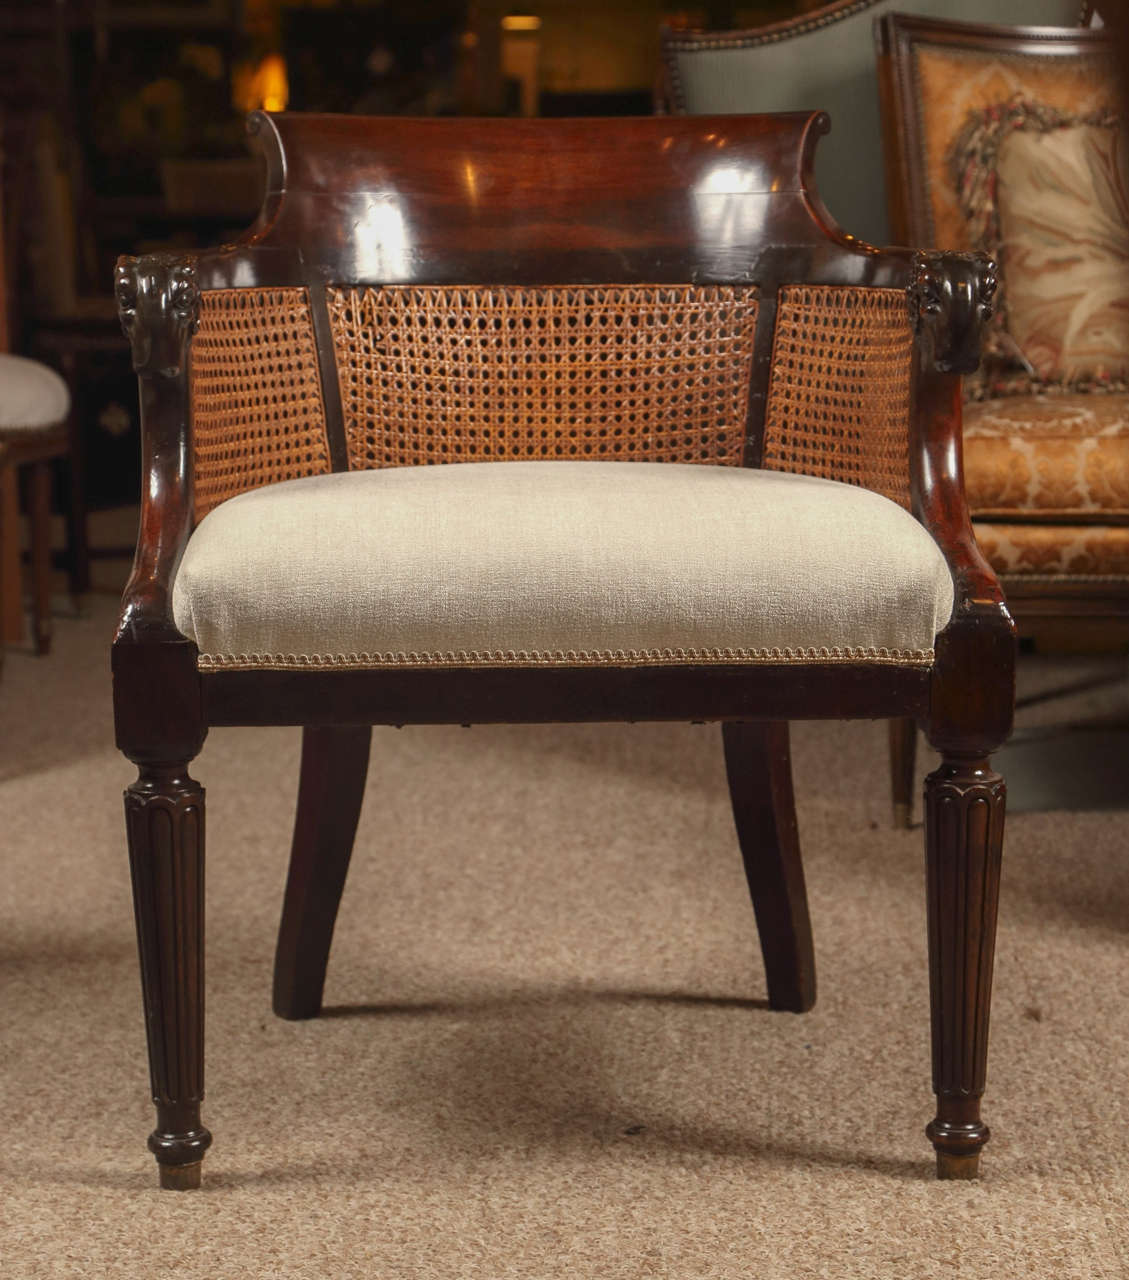 A Fine 19th Century Rams Head Arm / Desk Chair. The Louis XVI Style leg supporting a fine hand cane back seat rest with a curved back and sprayed arms leading to a pair of very fine carved Rams heads. In a new off white velour type fabric.